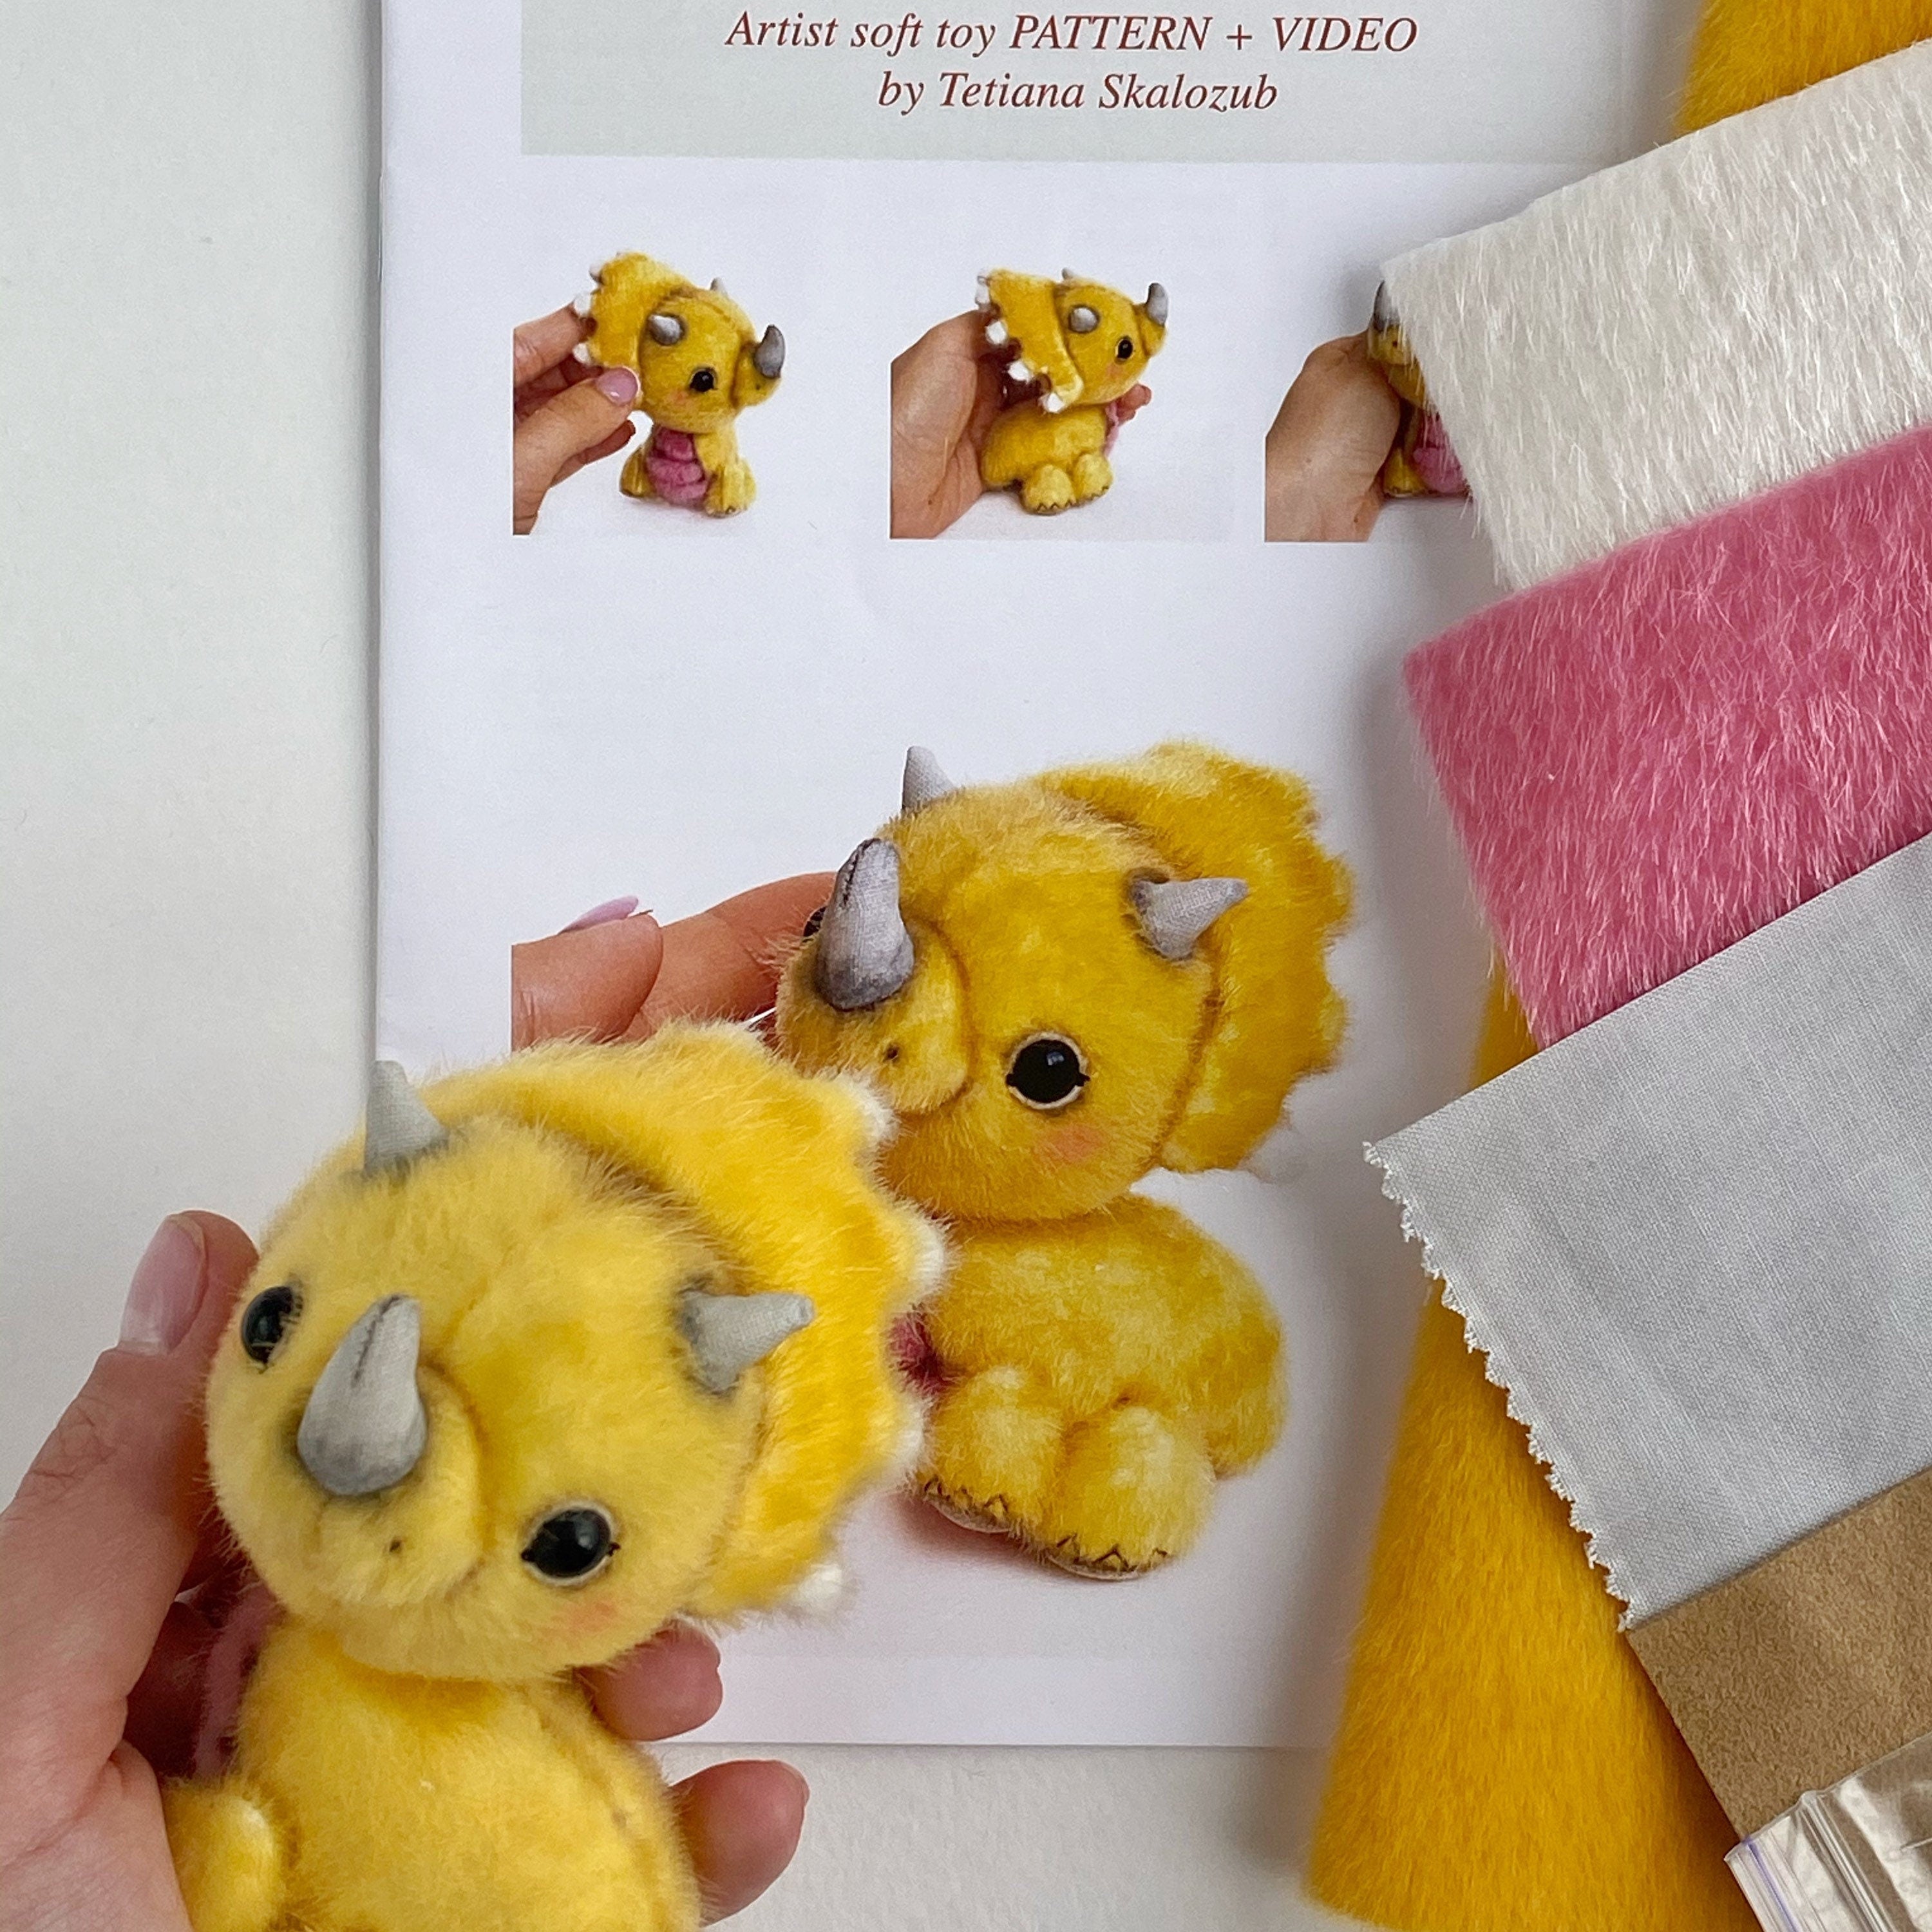 Styracosaur Triceratops - Sewing KIT, Video tutorial DIY stuffed toy pattern, Christmas tree decoration, softie plushie craft kit for adult